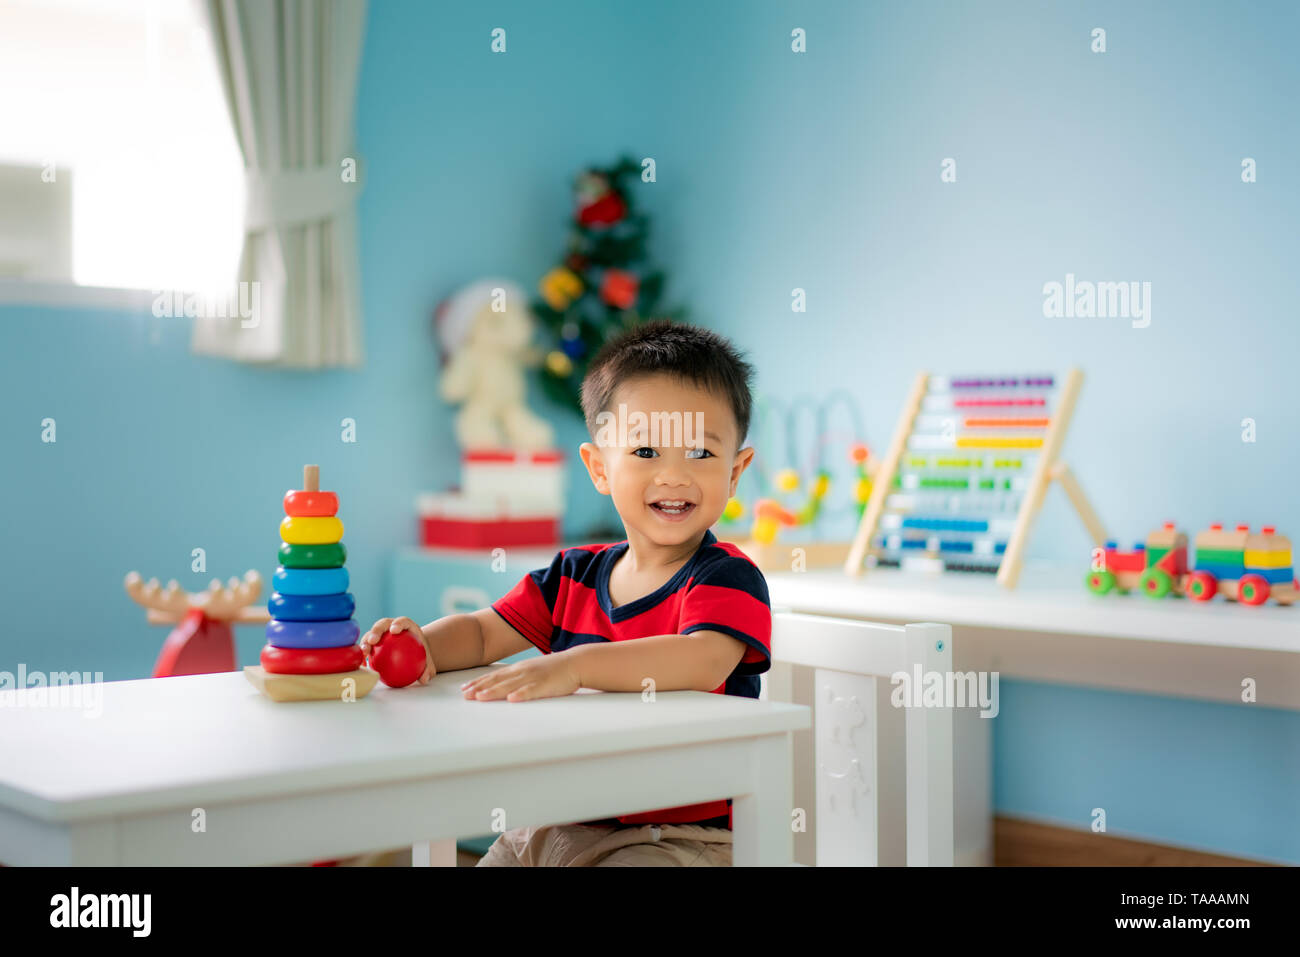 Adorable Asian Toddler baby boy sitting on chair and playing with color developmental toys at home. Stock Photo